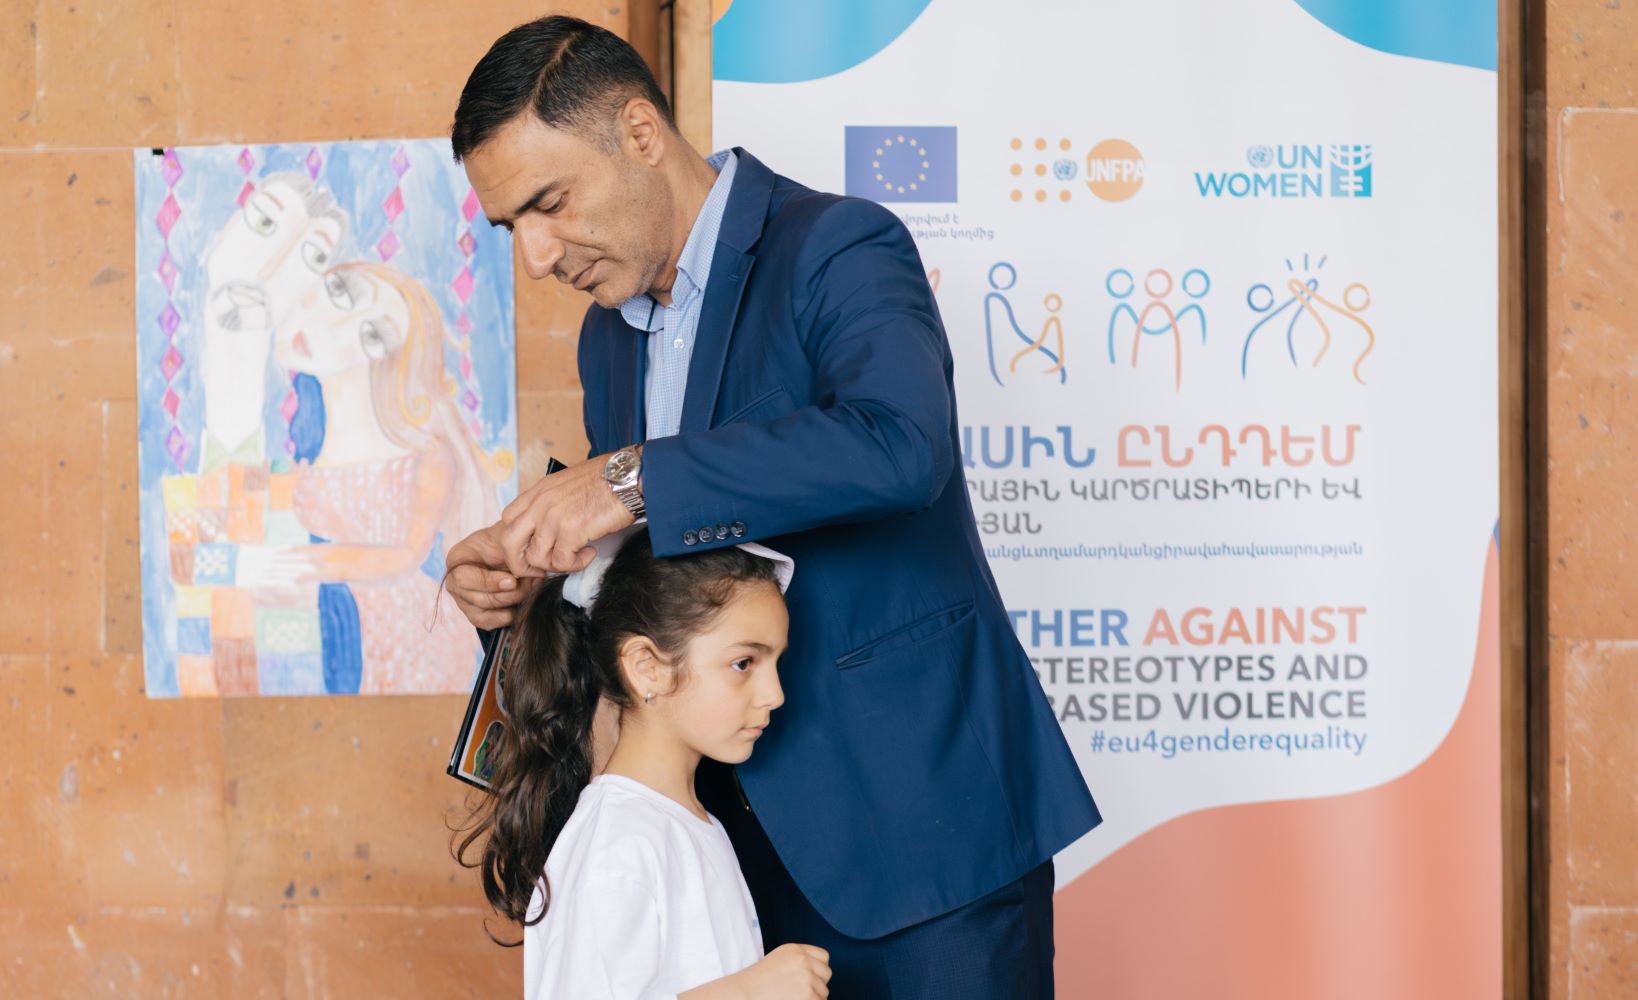 Image of a father assisting his daughter in putting on her cap in front of a banner.